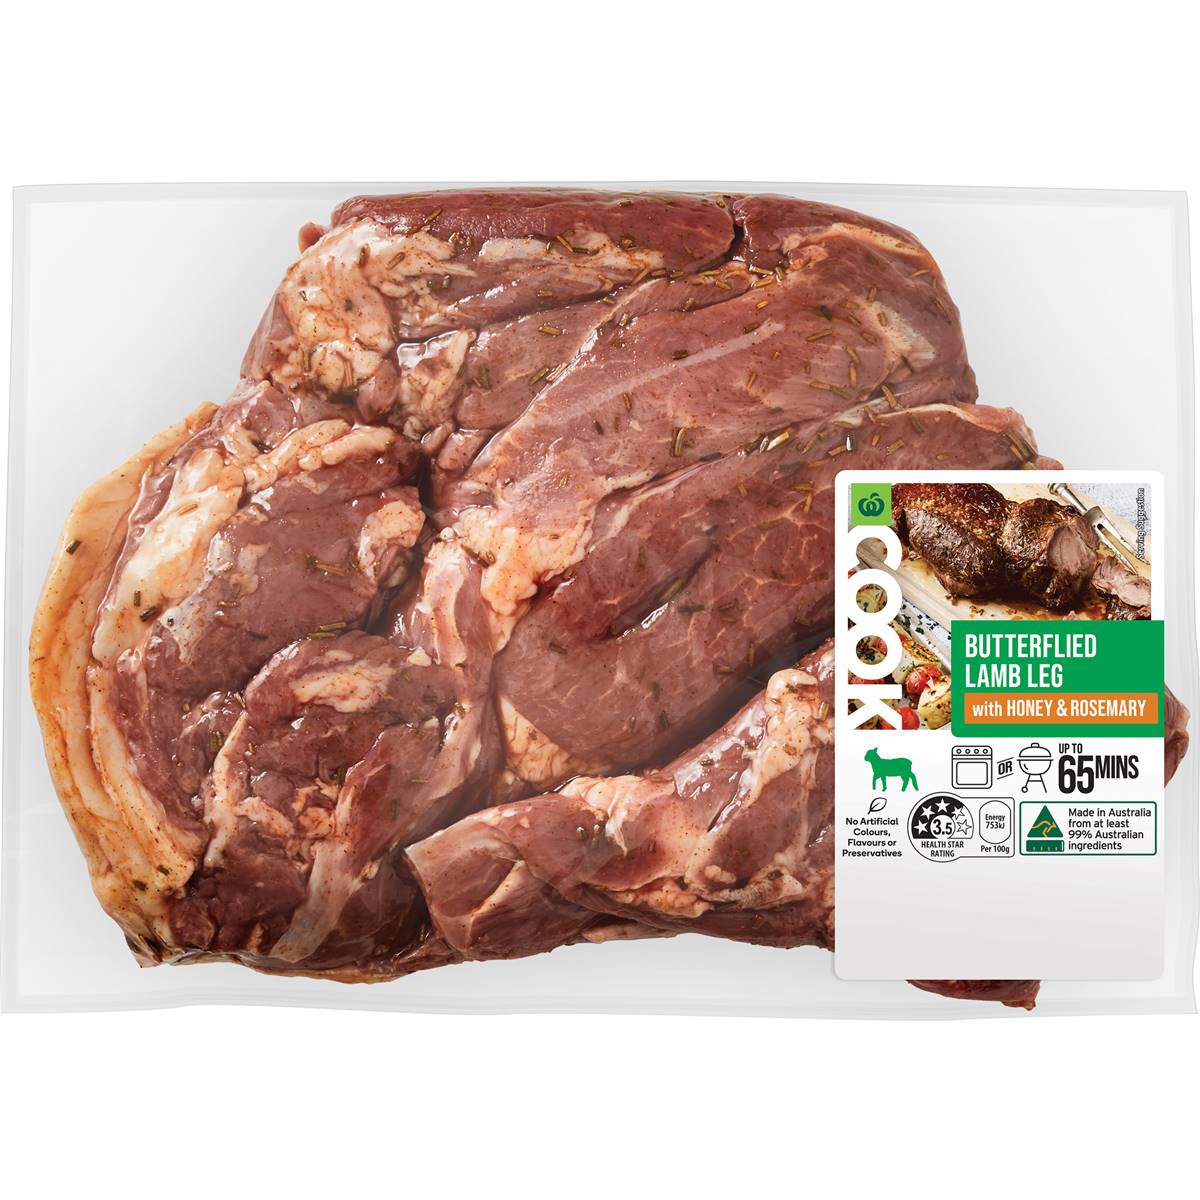 Calories in Woolworths Cook Butterflied Lamb Leg With Honey & Rosemary